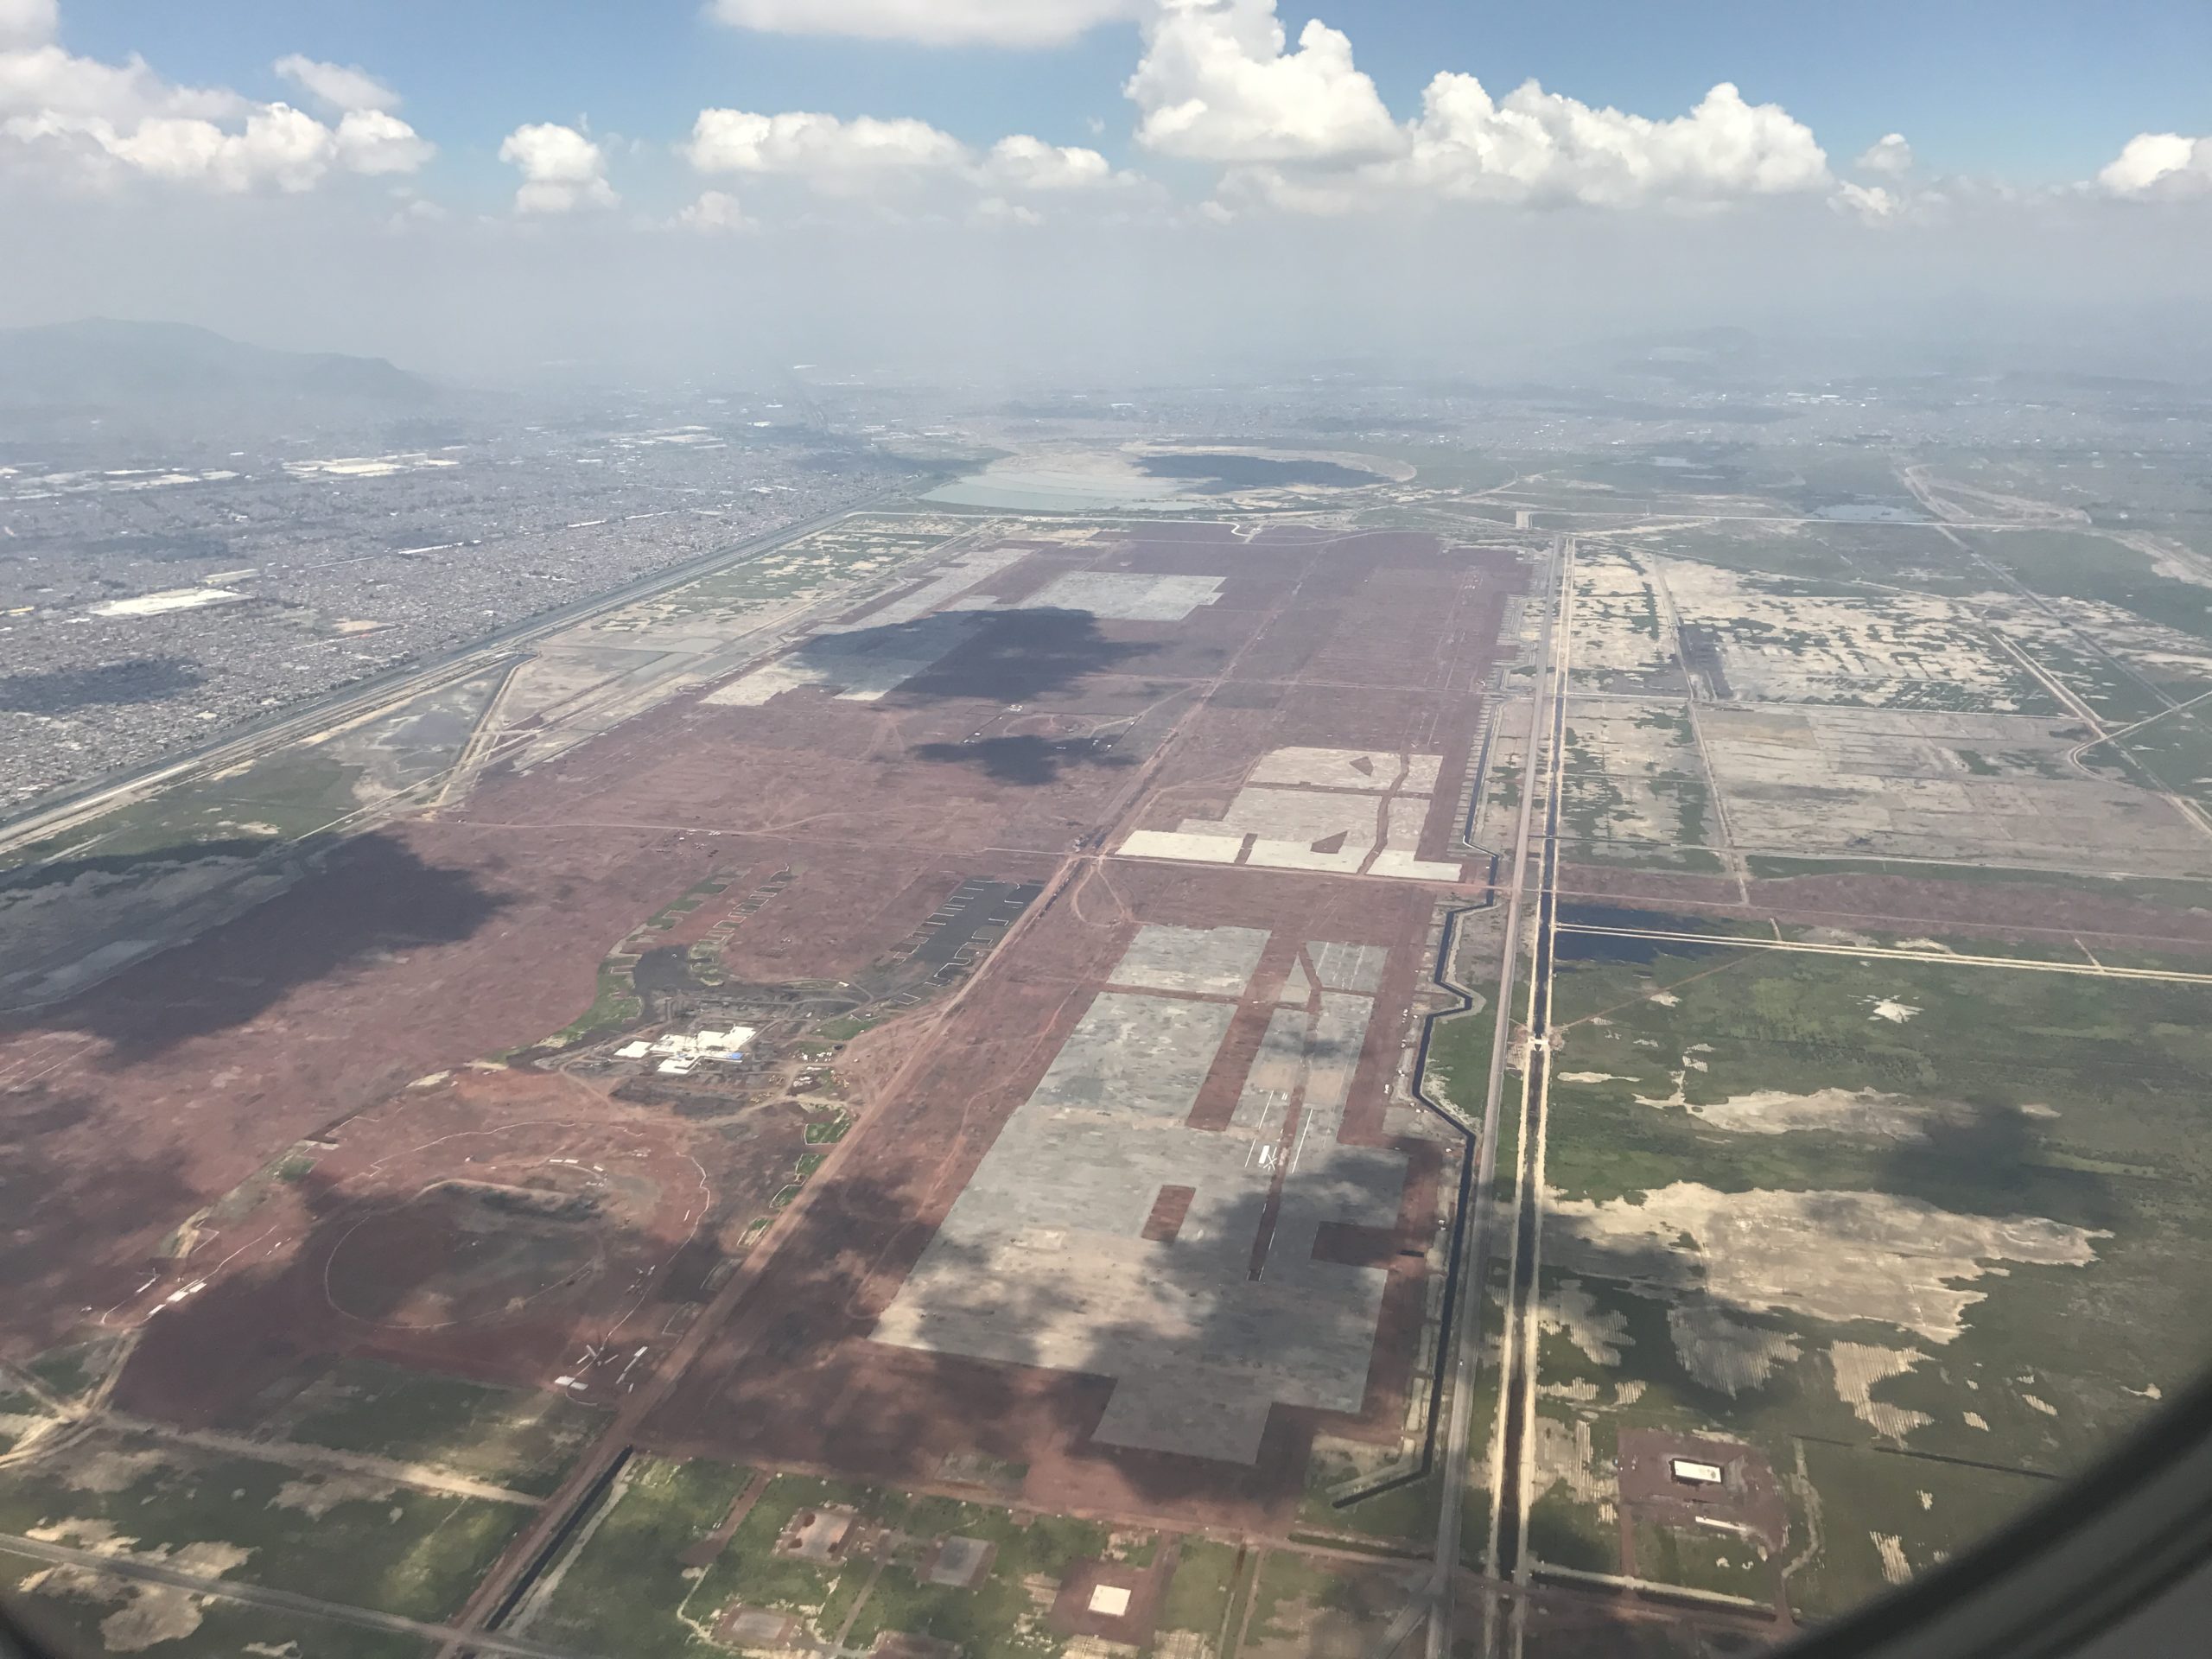 The original new Mexico City AIrport site as seen on departure from the current airport in 2017